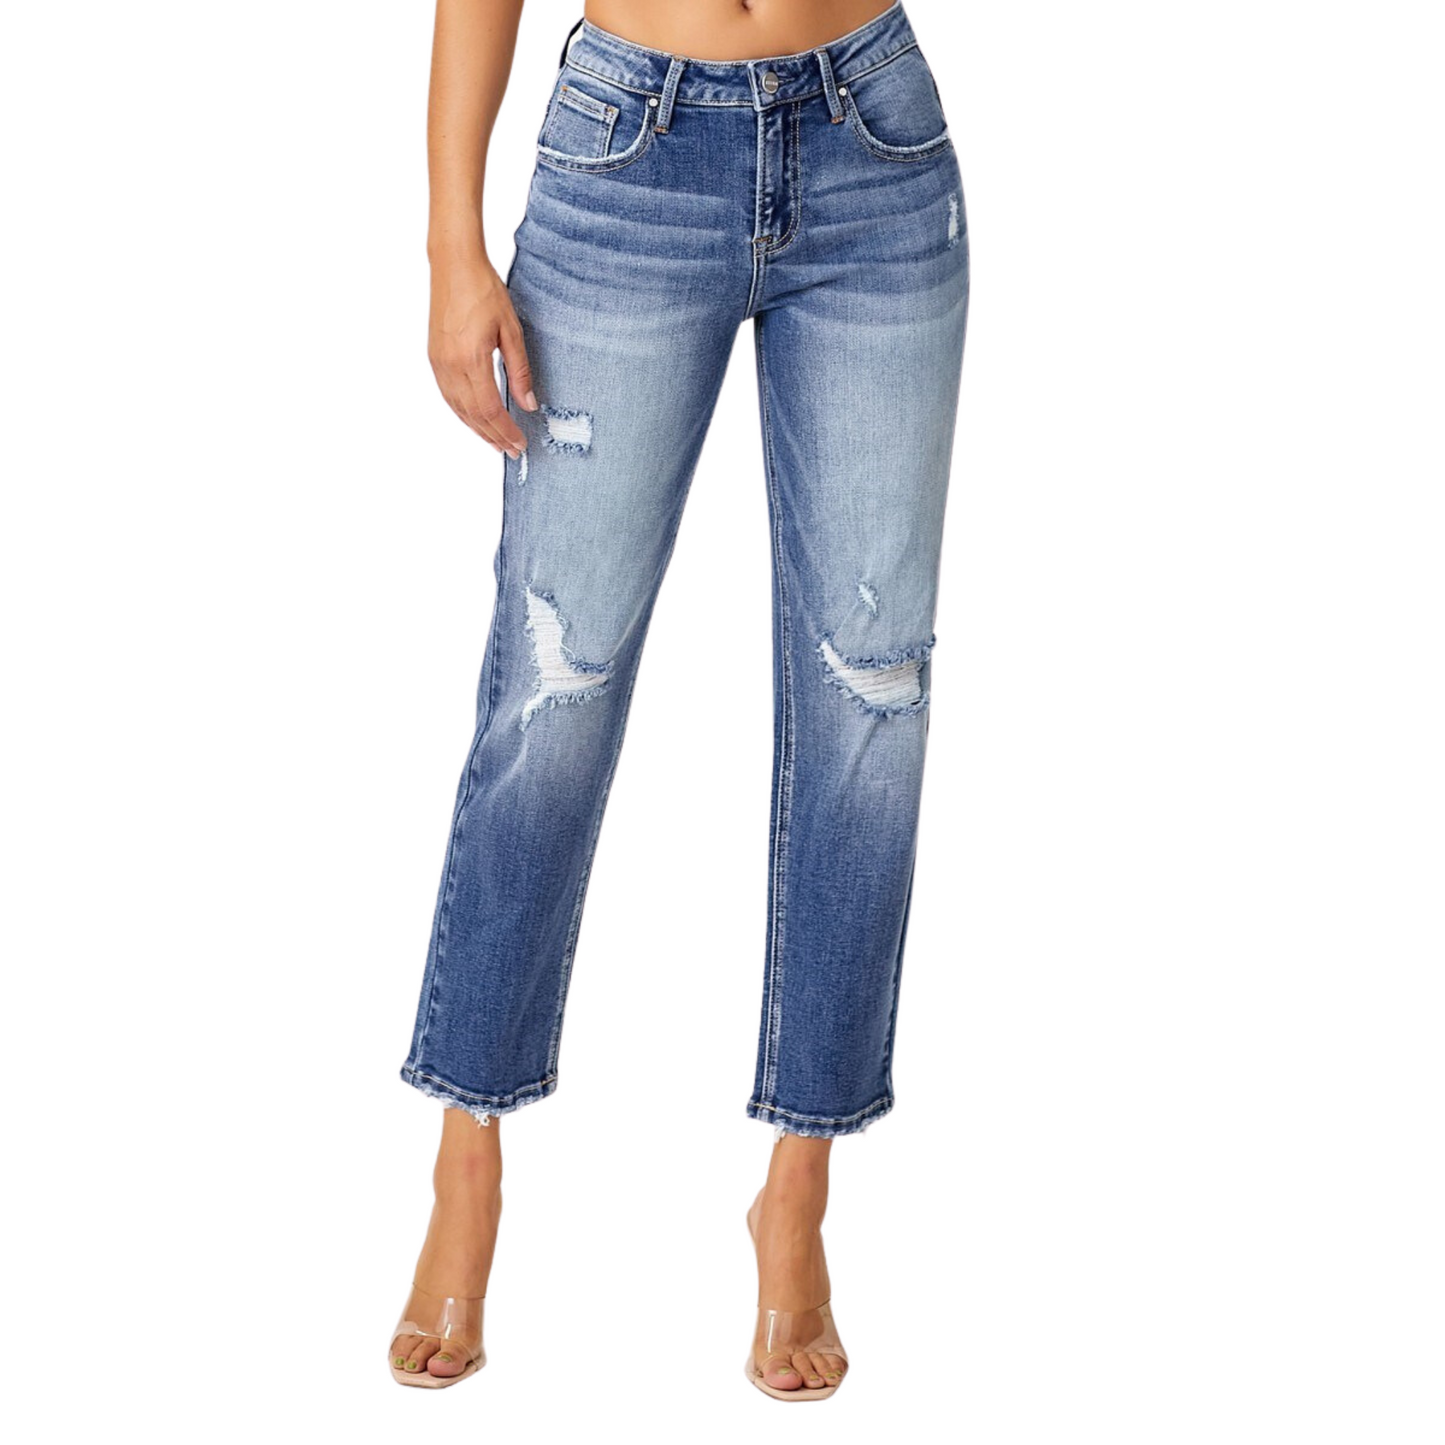 These Mid Rise Distressed Boyfriend Jeans from Risen Brand are perfect for a casual and comfortable look. They feature a dark wash, a cropped fit, and stylish distressed details. Create a unique and fashionable look with these high-quality jeans.